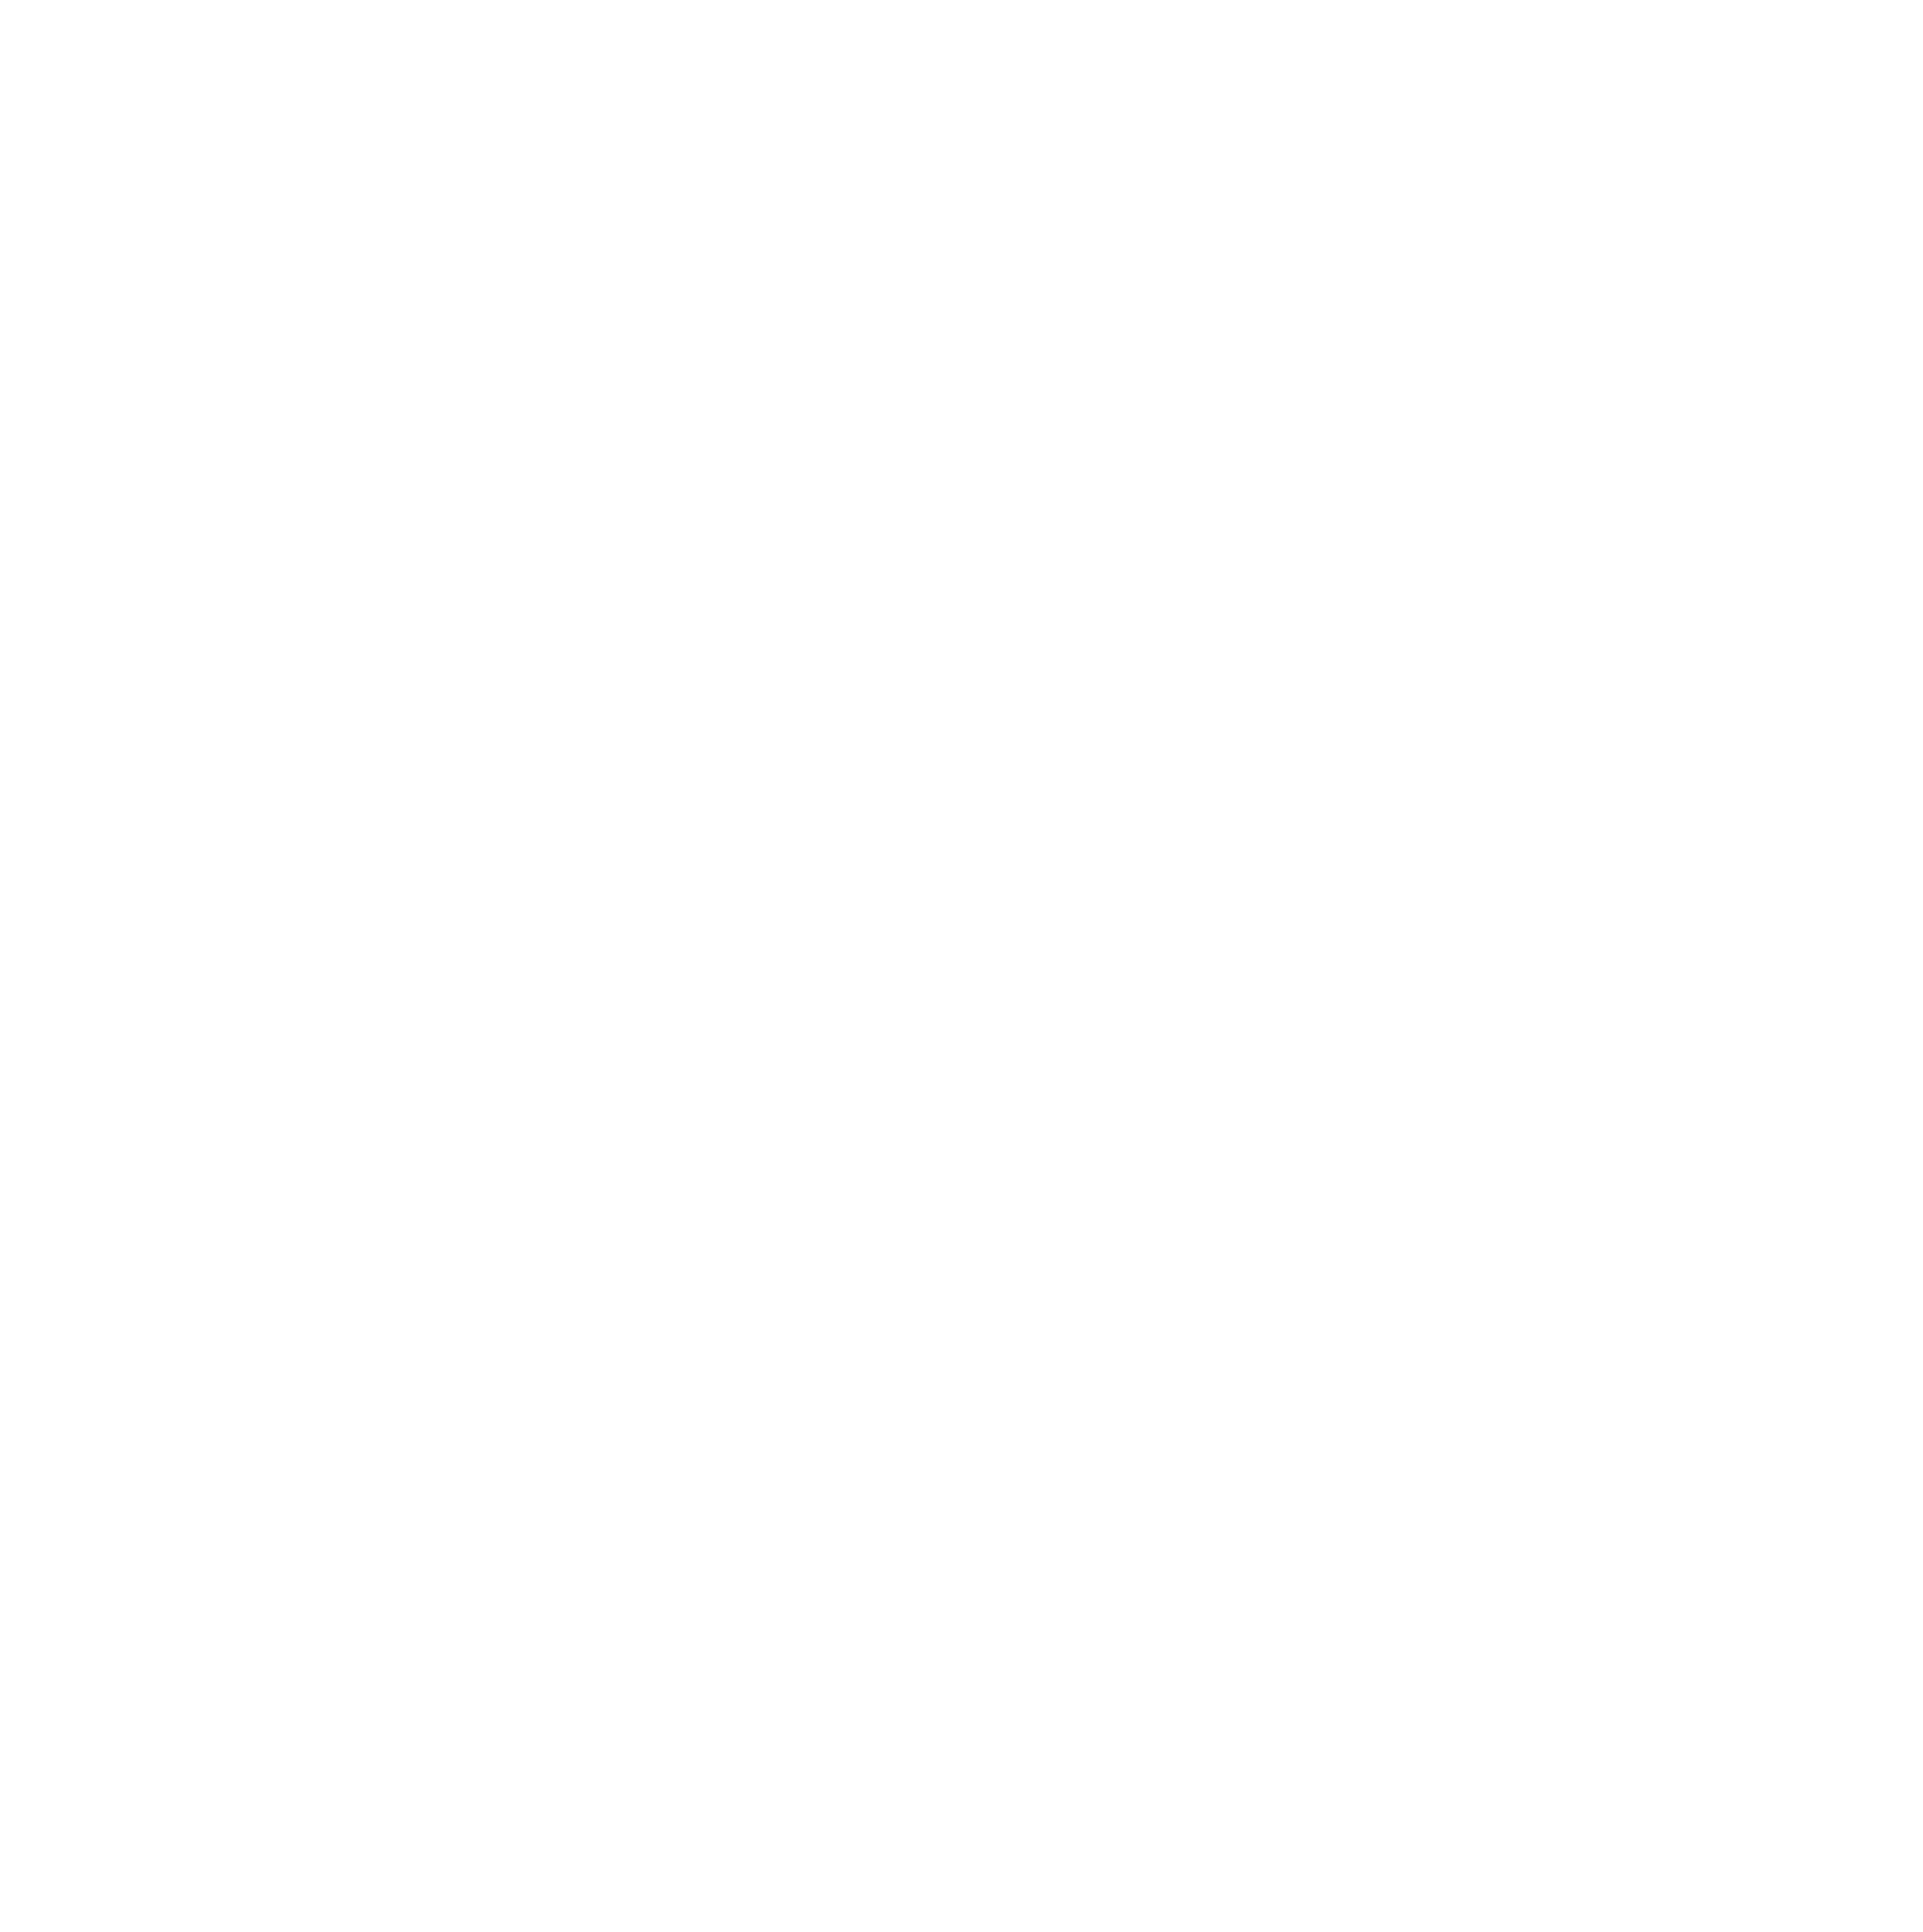 Save Time icon